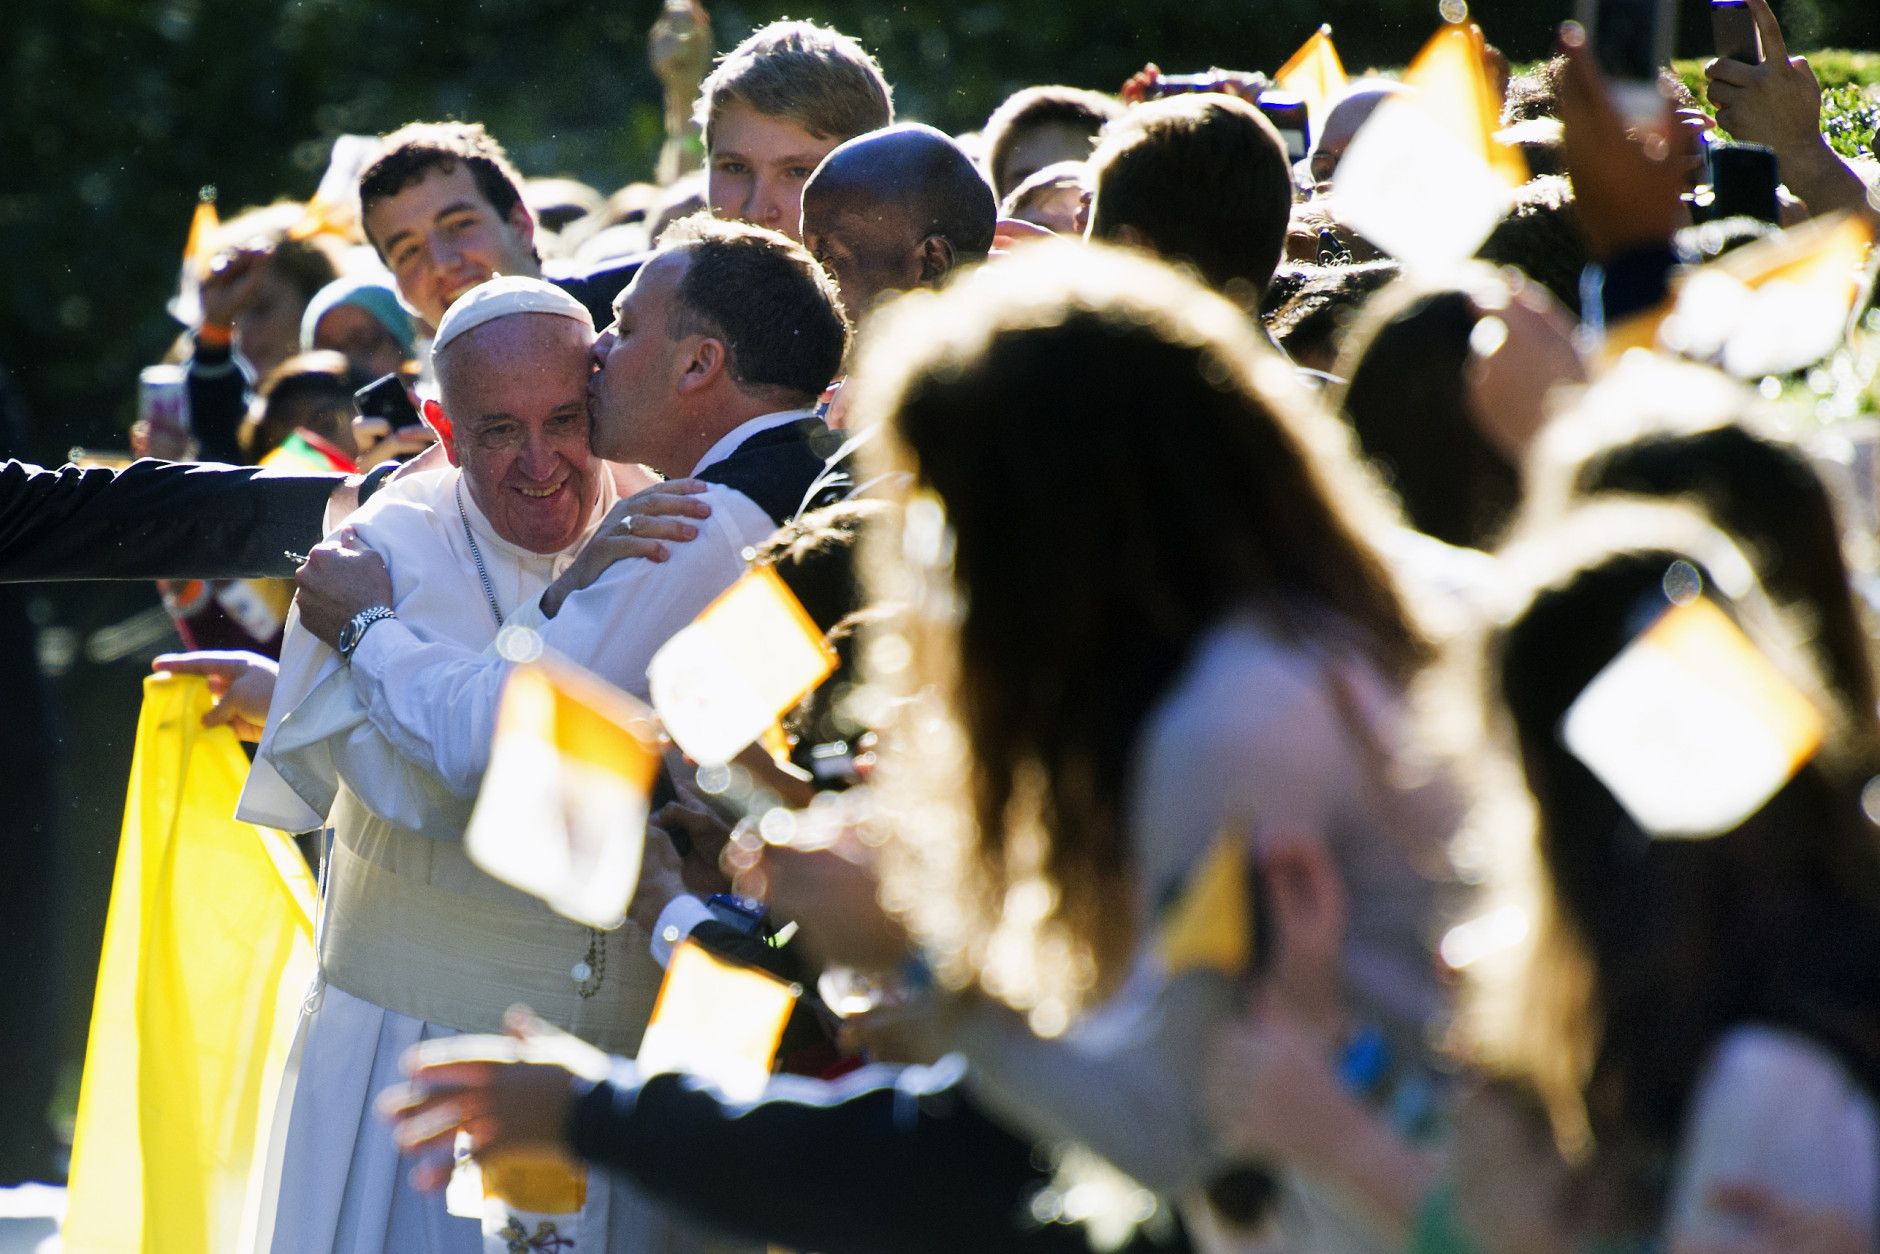 A man kisses Pope Francis while he greets well-wishers outside the Apostolic Nunciature, the Vatican's diplomatic mission in Washington, Wednesday, Sept. 23, 2015, prior to his departure to the White House where President Barack Obama will host a state arrival ceremony.  (AP Photo/Cliff Owen)